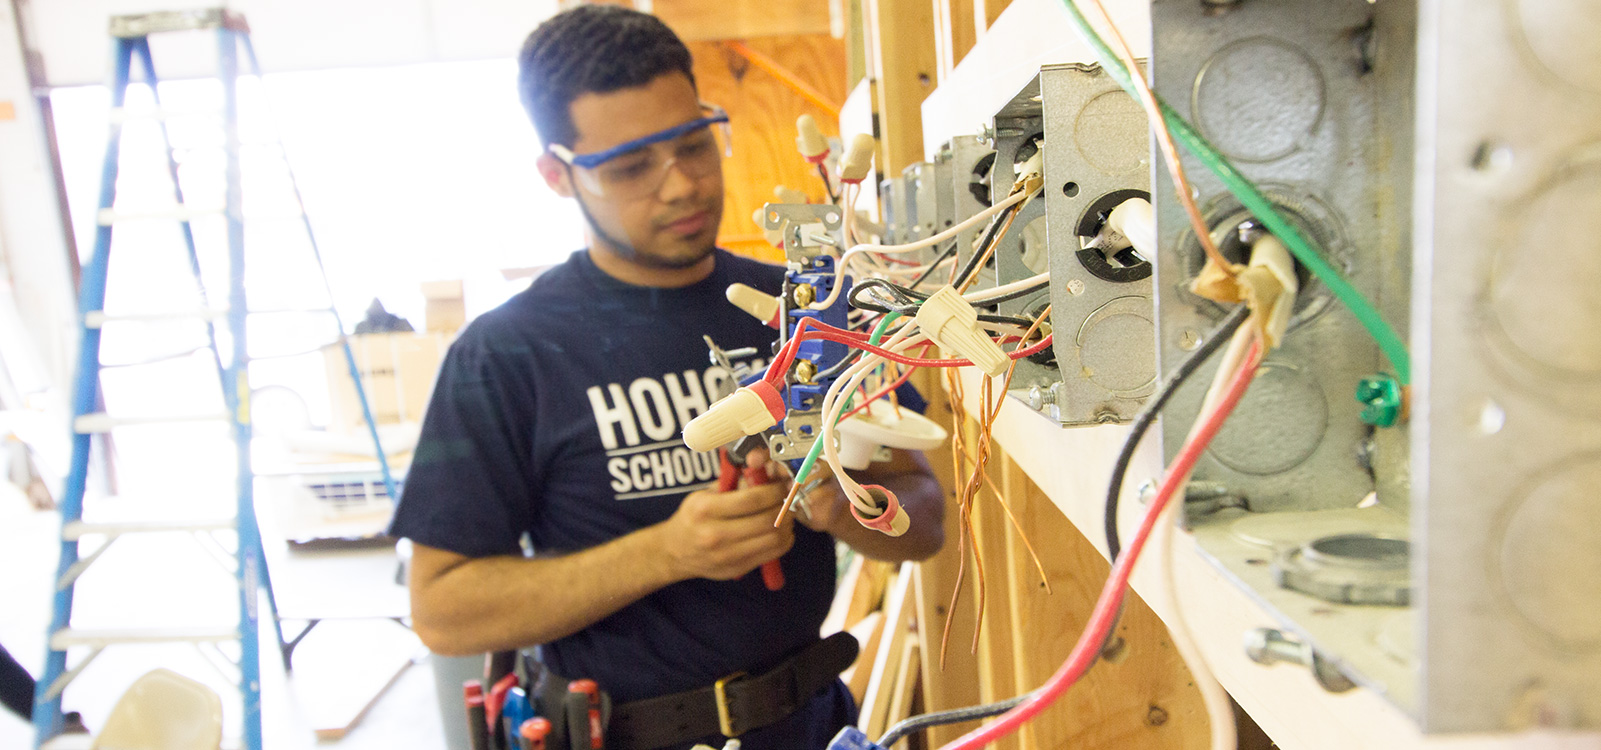 Electrician Apprenticeship student practices wiring